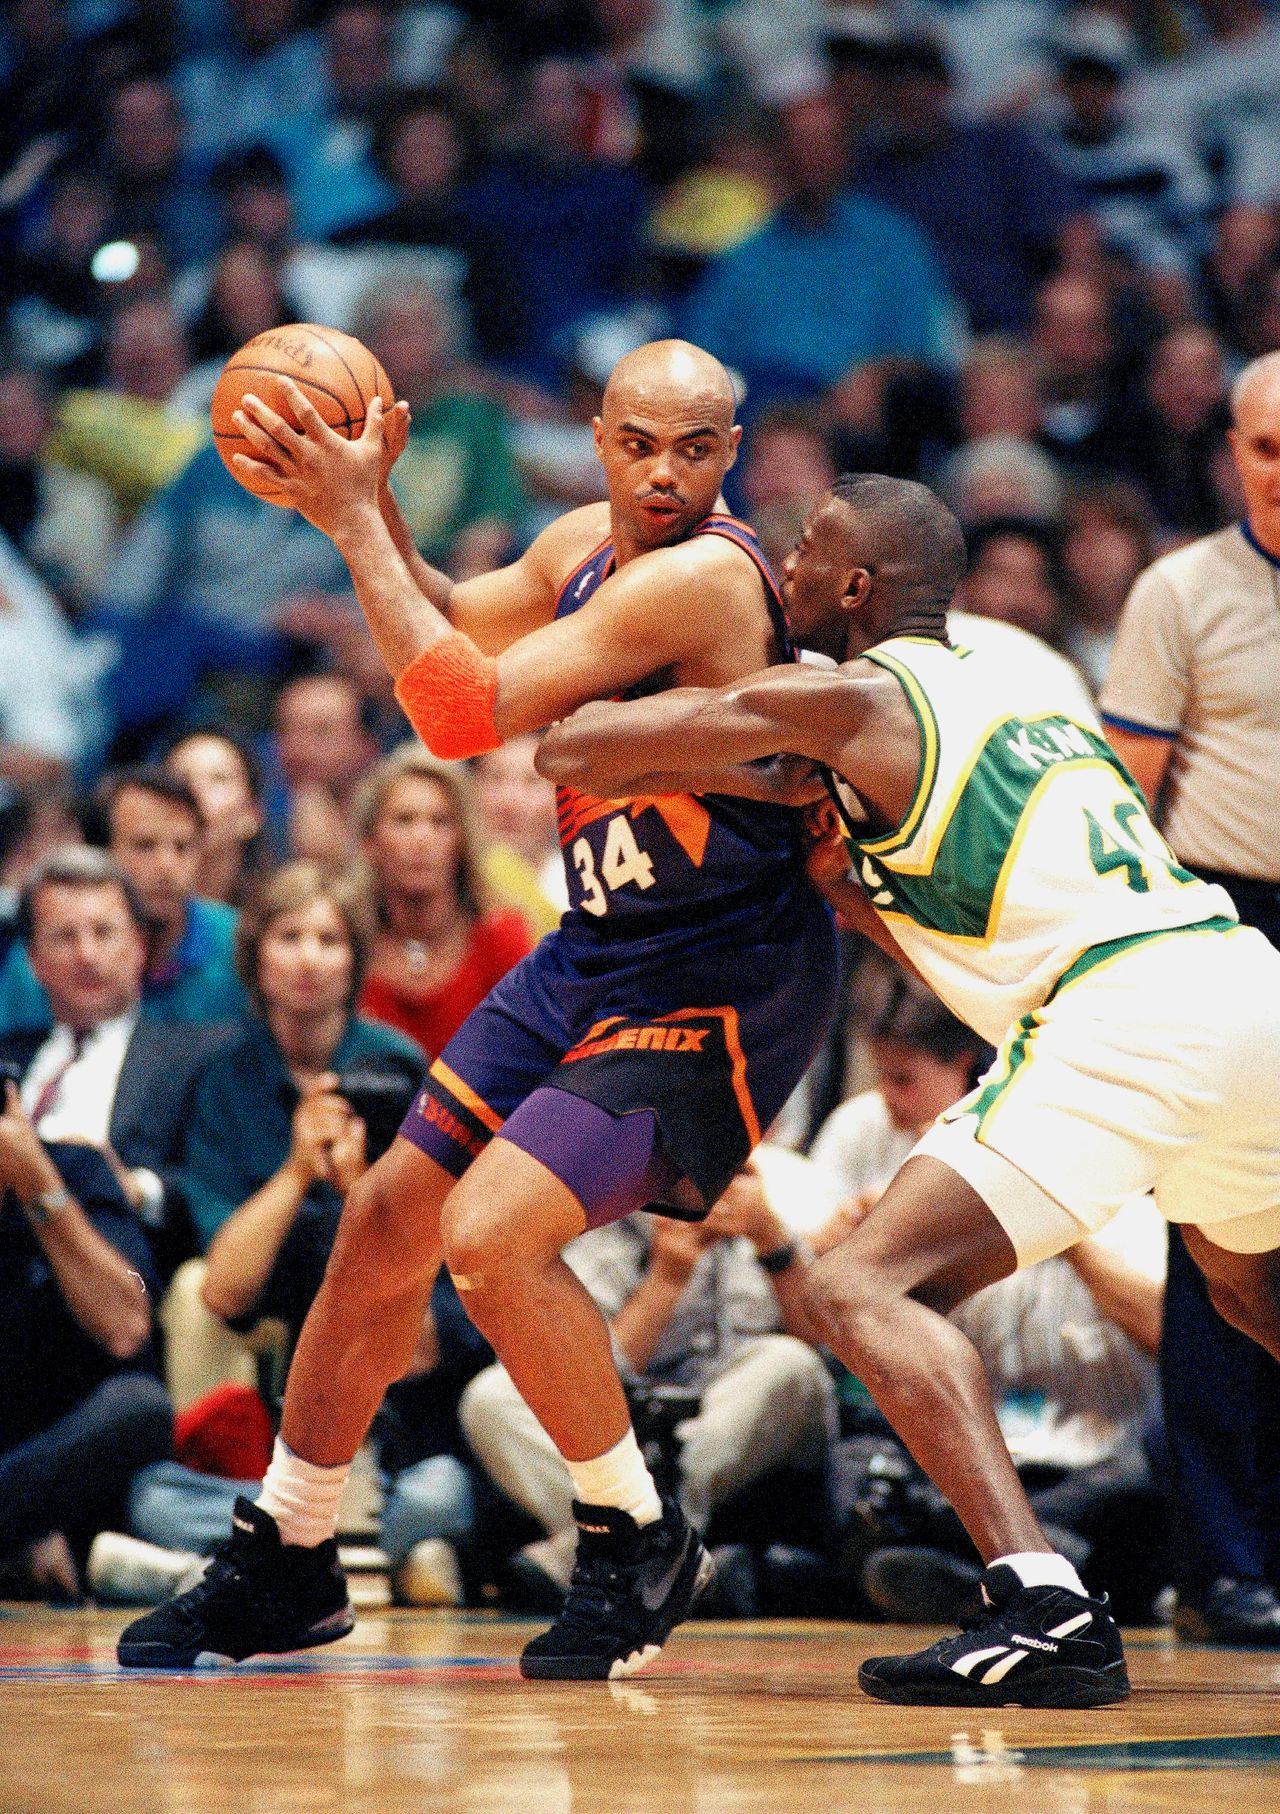 Charles Barkley's tendency to methodically back his opponents down beneath the basket prompted what was known as "The Barkley Rule"